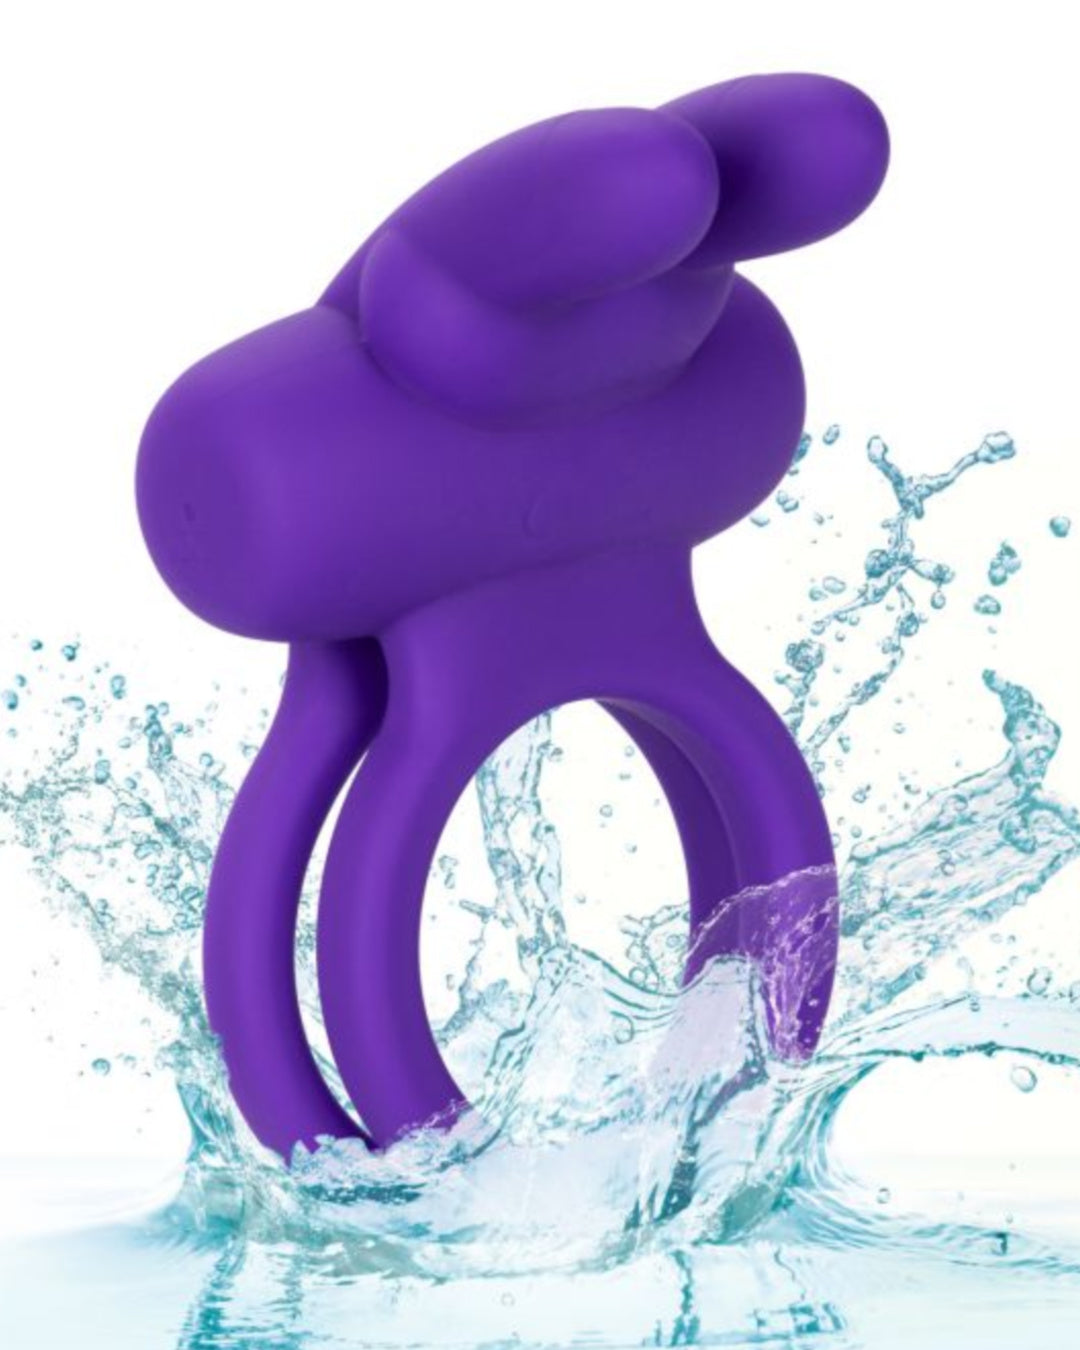 Dual Rockin Rabbit Silicone Vibrating Couples Toy by Calexotics Waterproof